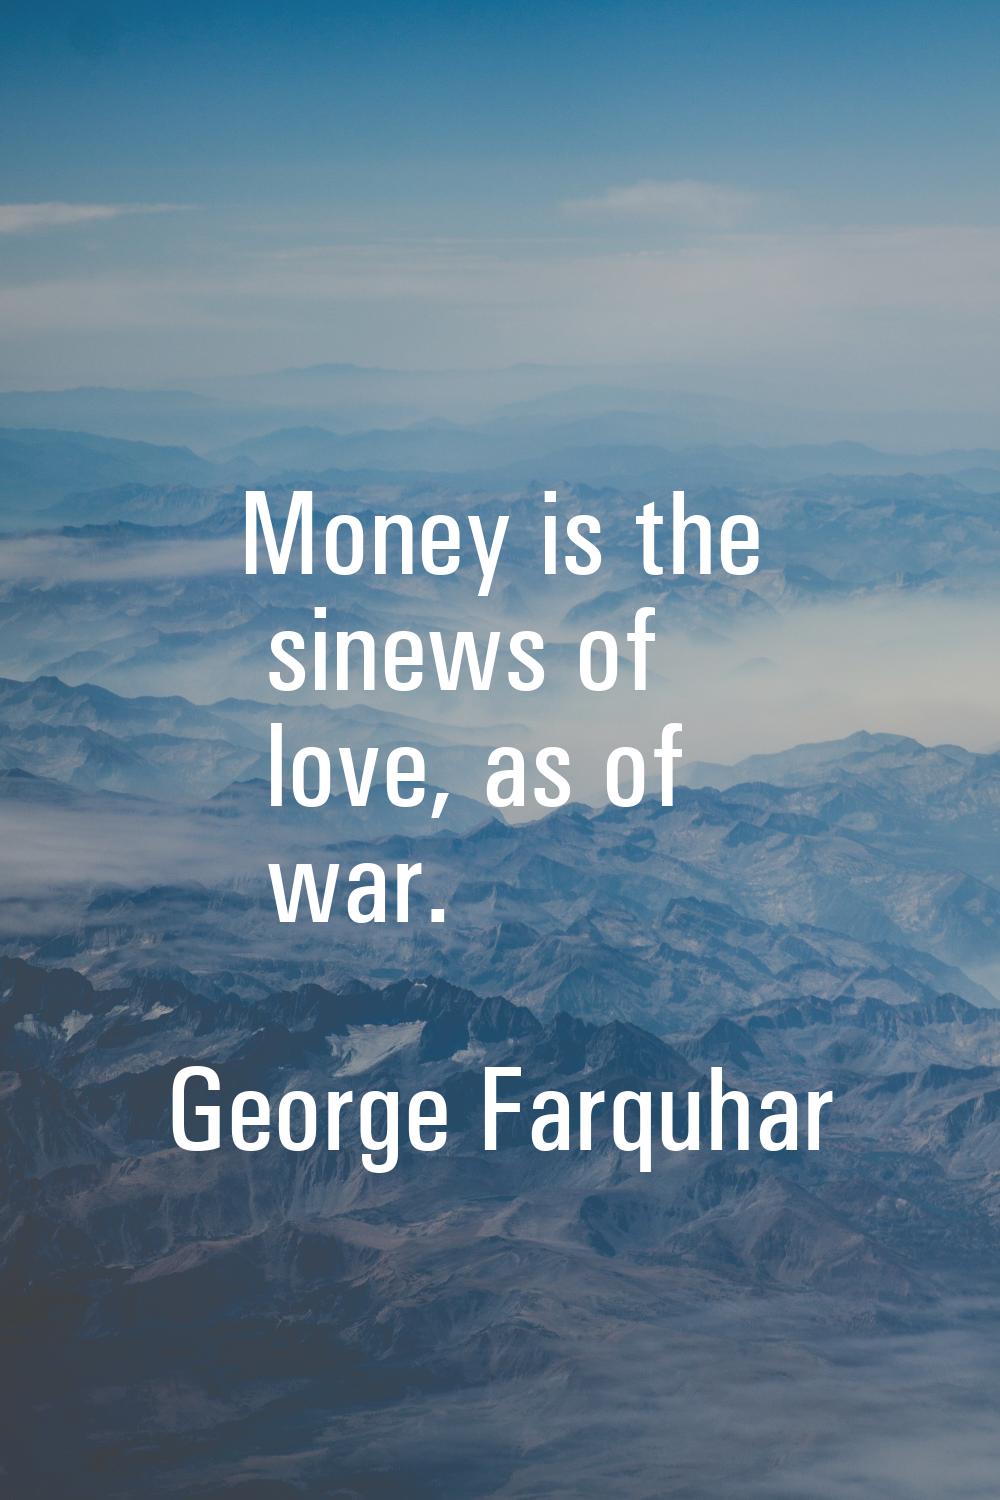 Money is the sinews of love, as of war.